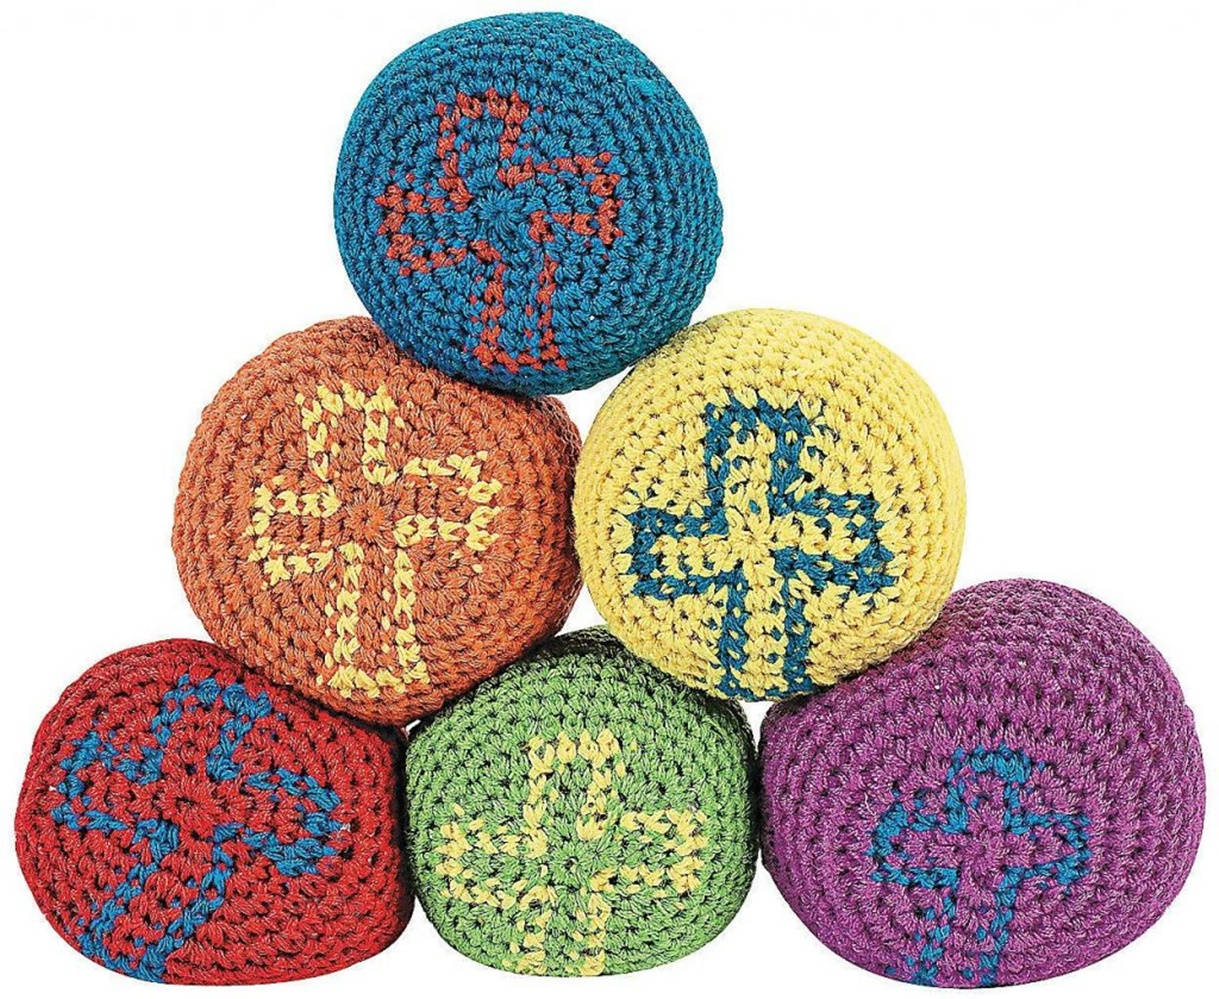 Hackysack Crochet Cross Pastel Can Be Translated To Spanish As 